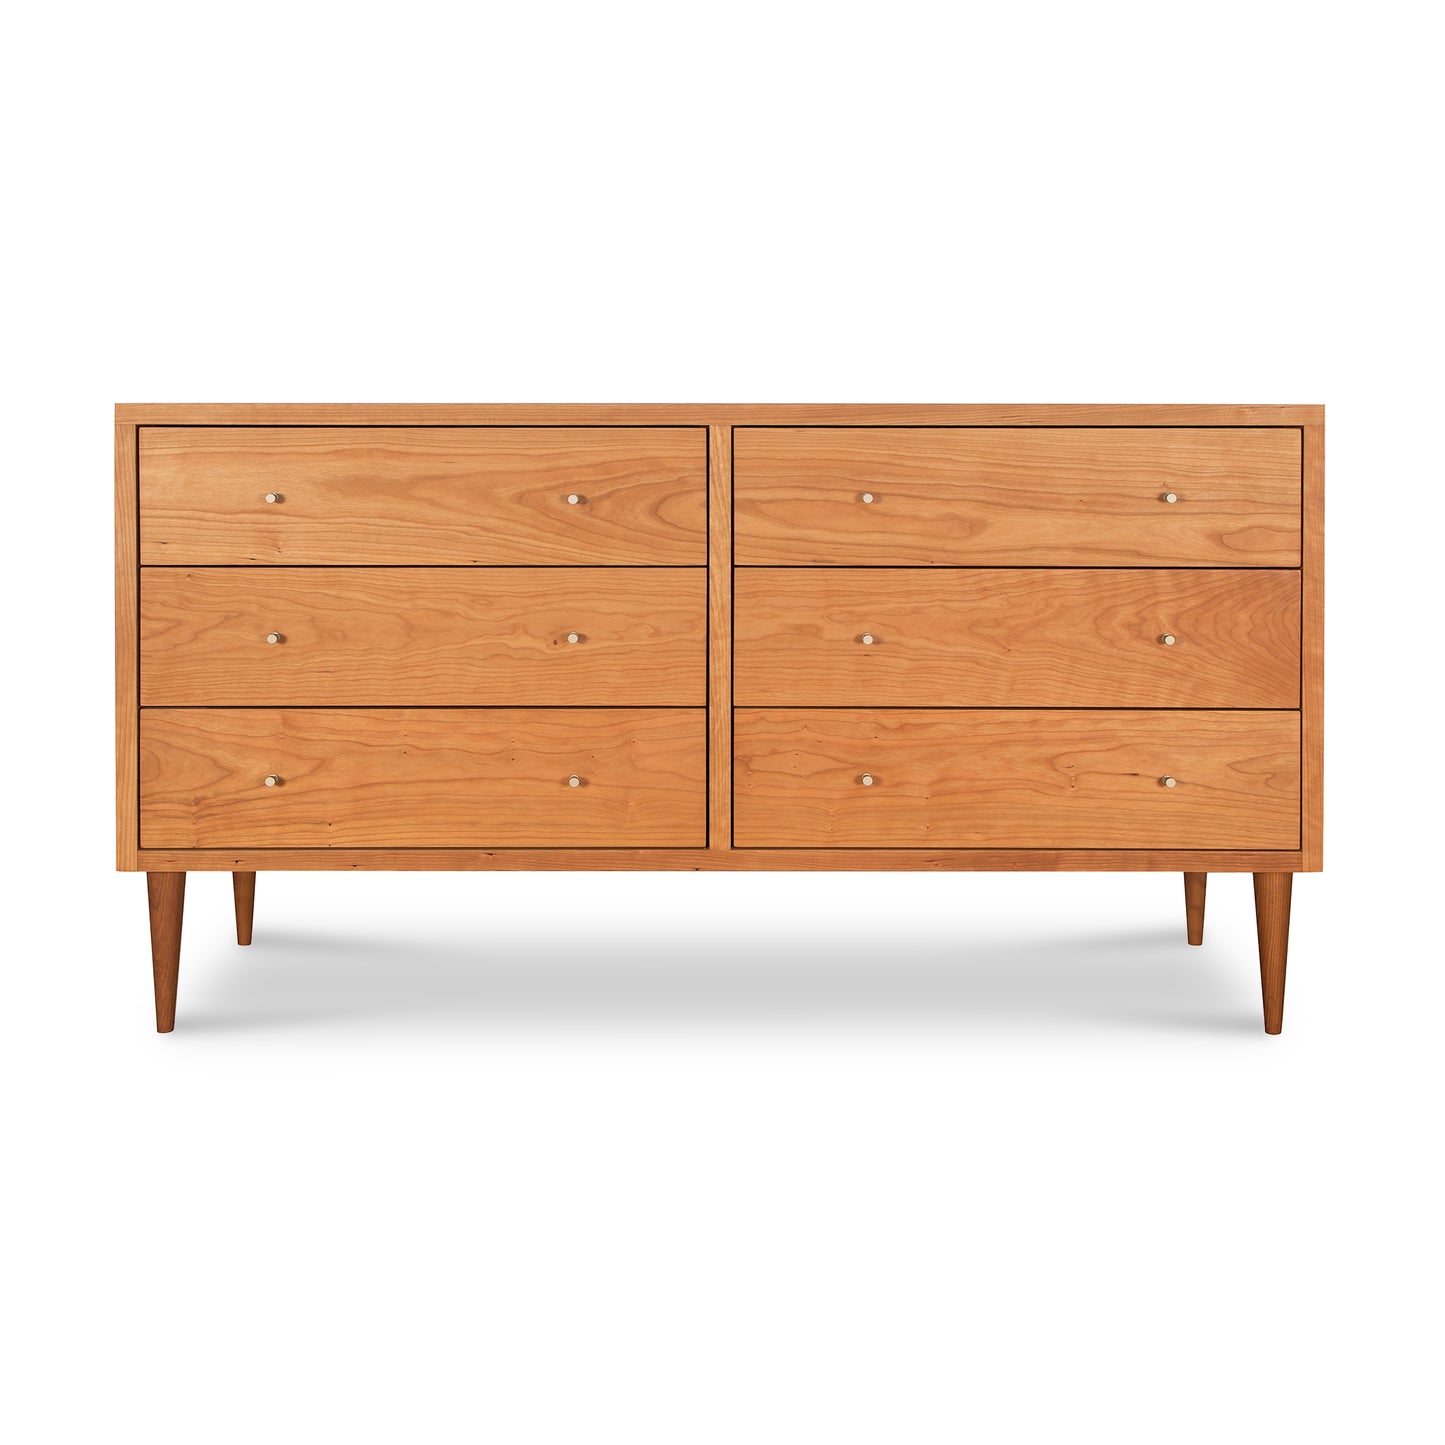 A solid wood construction mid-century modern dresser, named the Vermont Furniture Designs Larssen 6-Drawer Dresser, with six drawers and tapered legs on a white background.